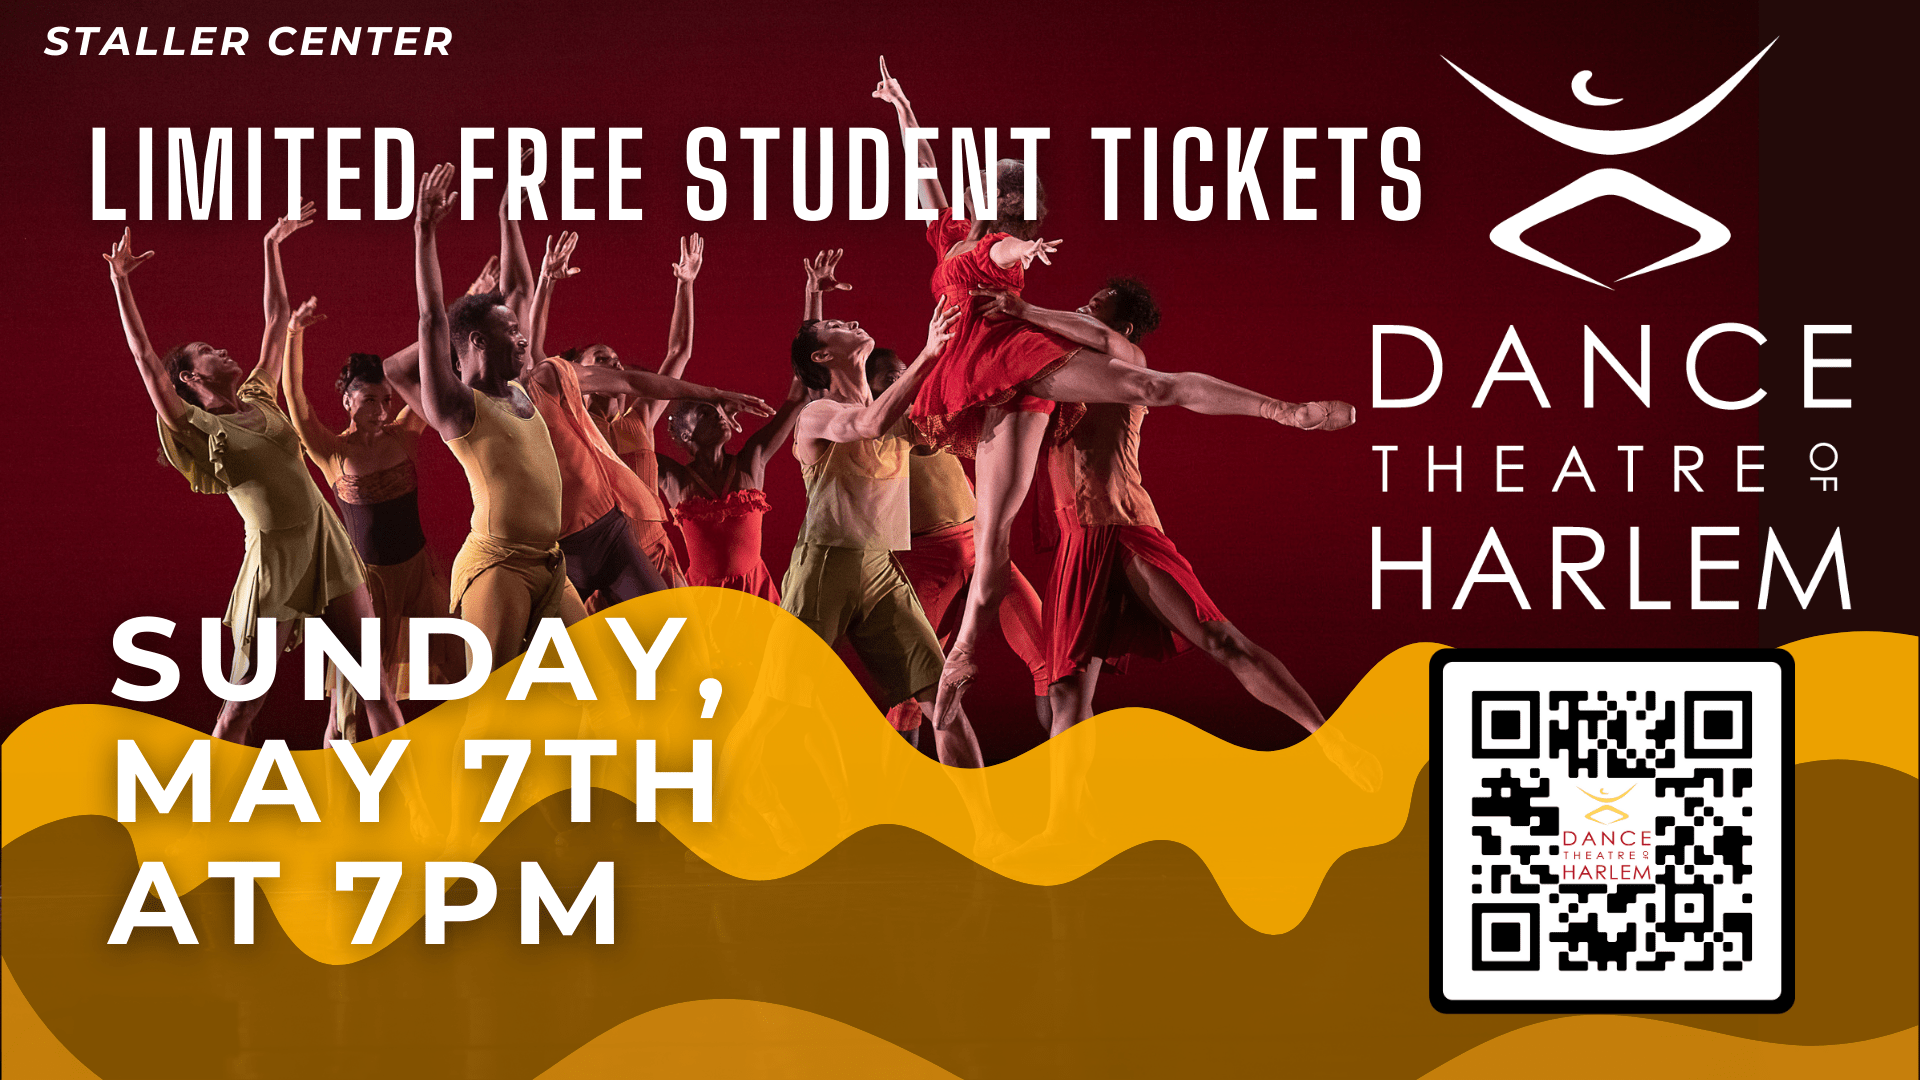 Dance Theatre of Harlem - LIMITED FREE STUDENT TICKETS